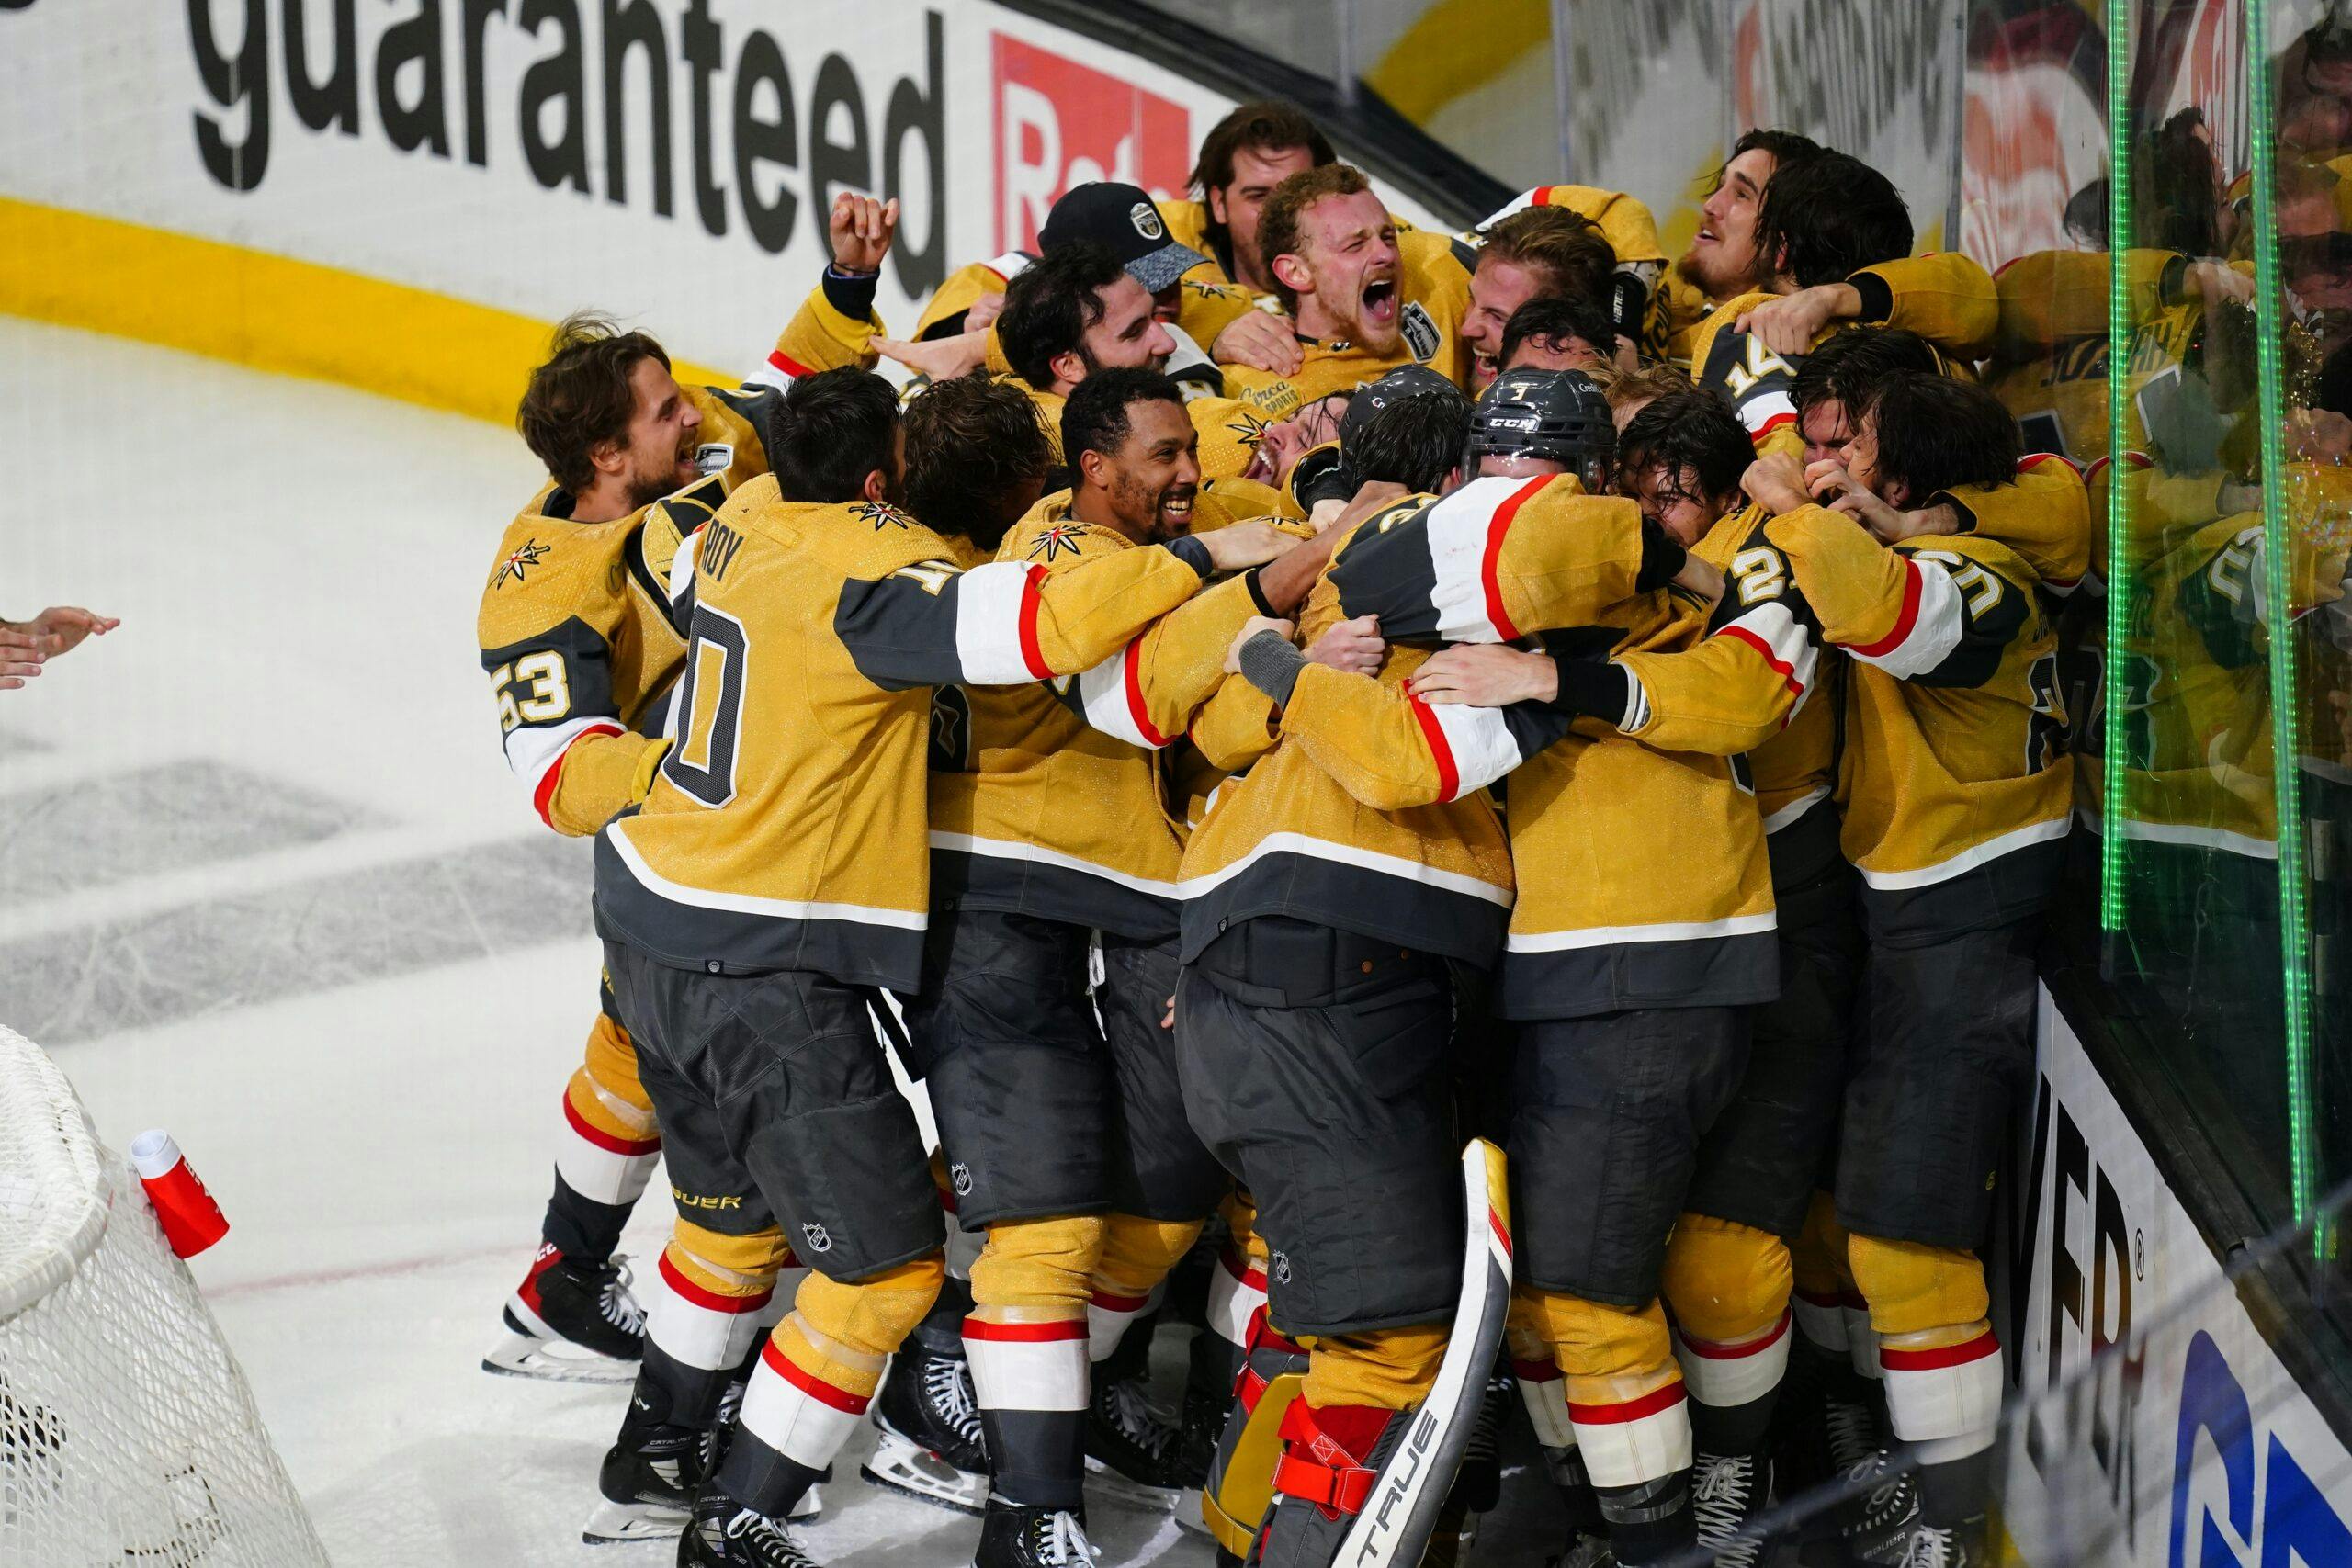 Vegas Golden Knghts make history with their first Stanley Cup championship